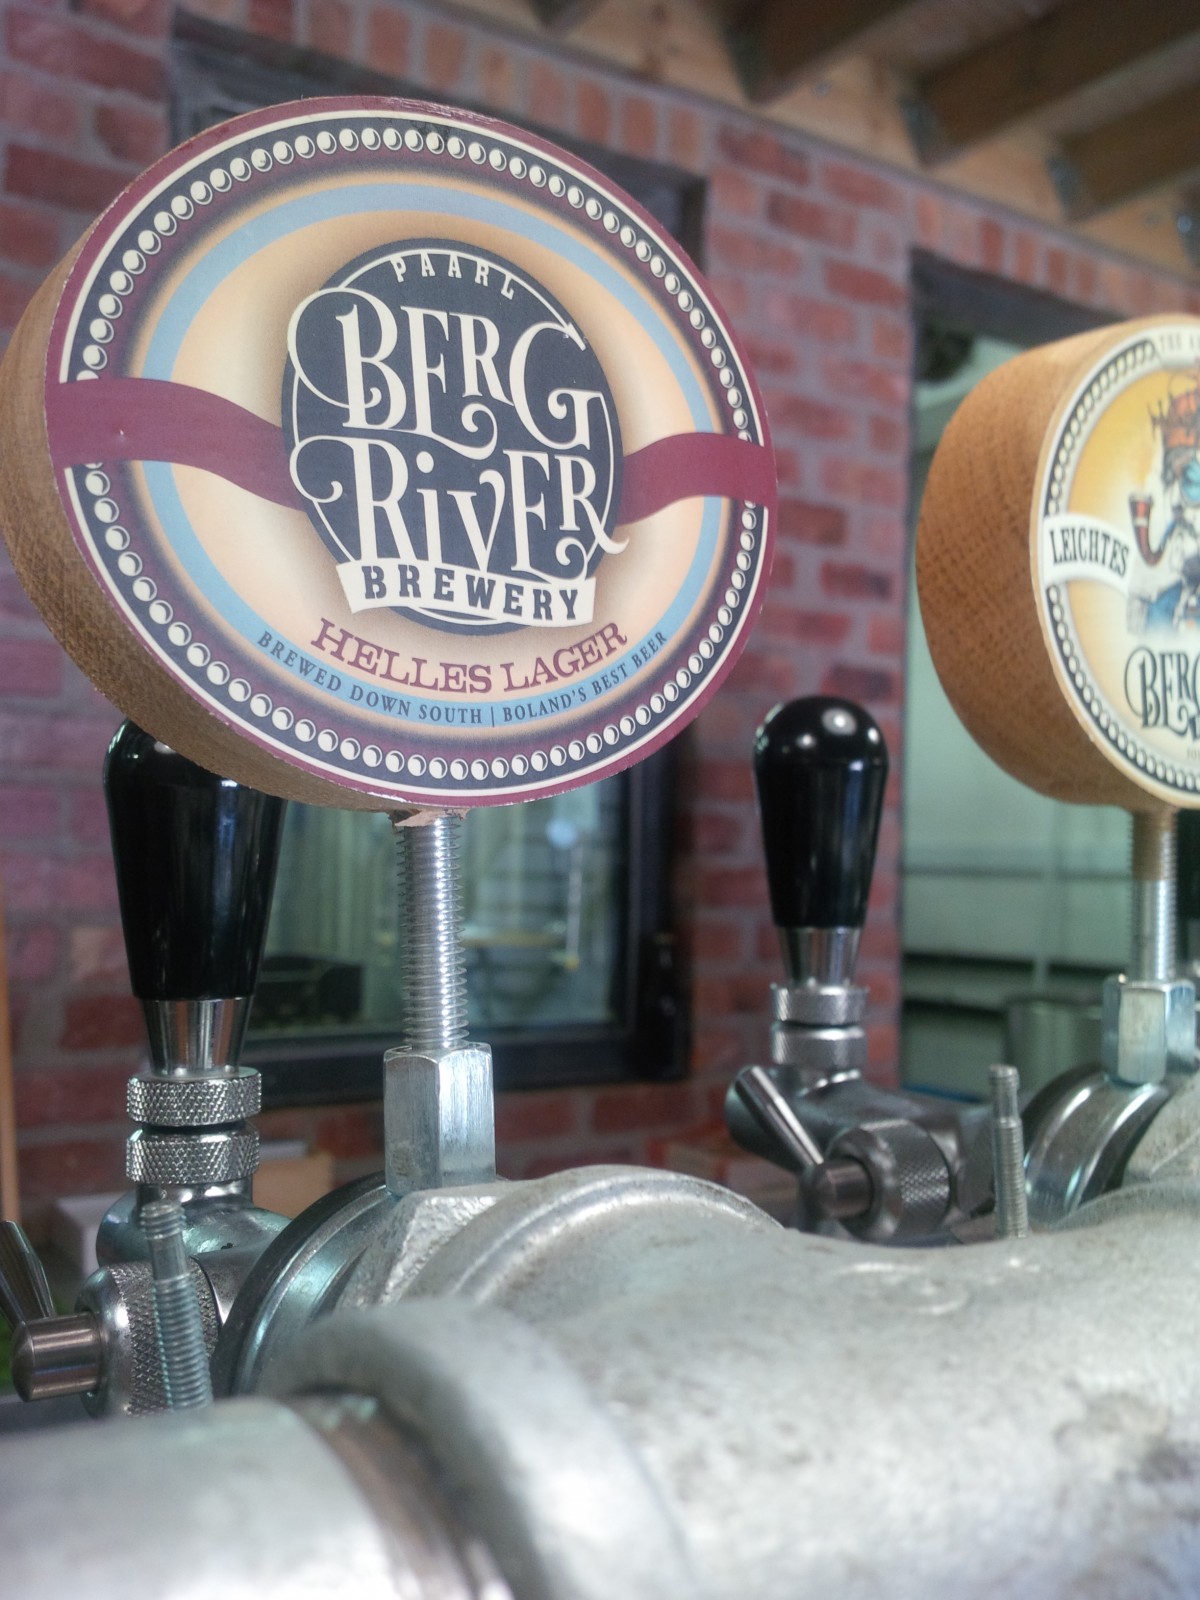 Taste what Jorg is brewing these days at Berg River in Paarl